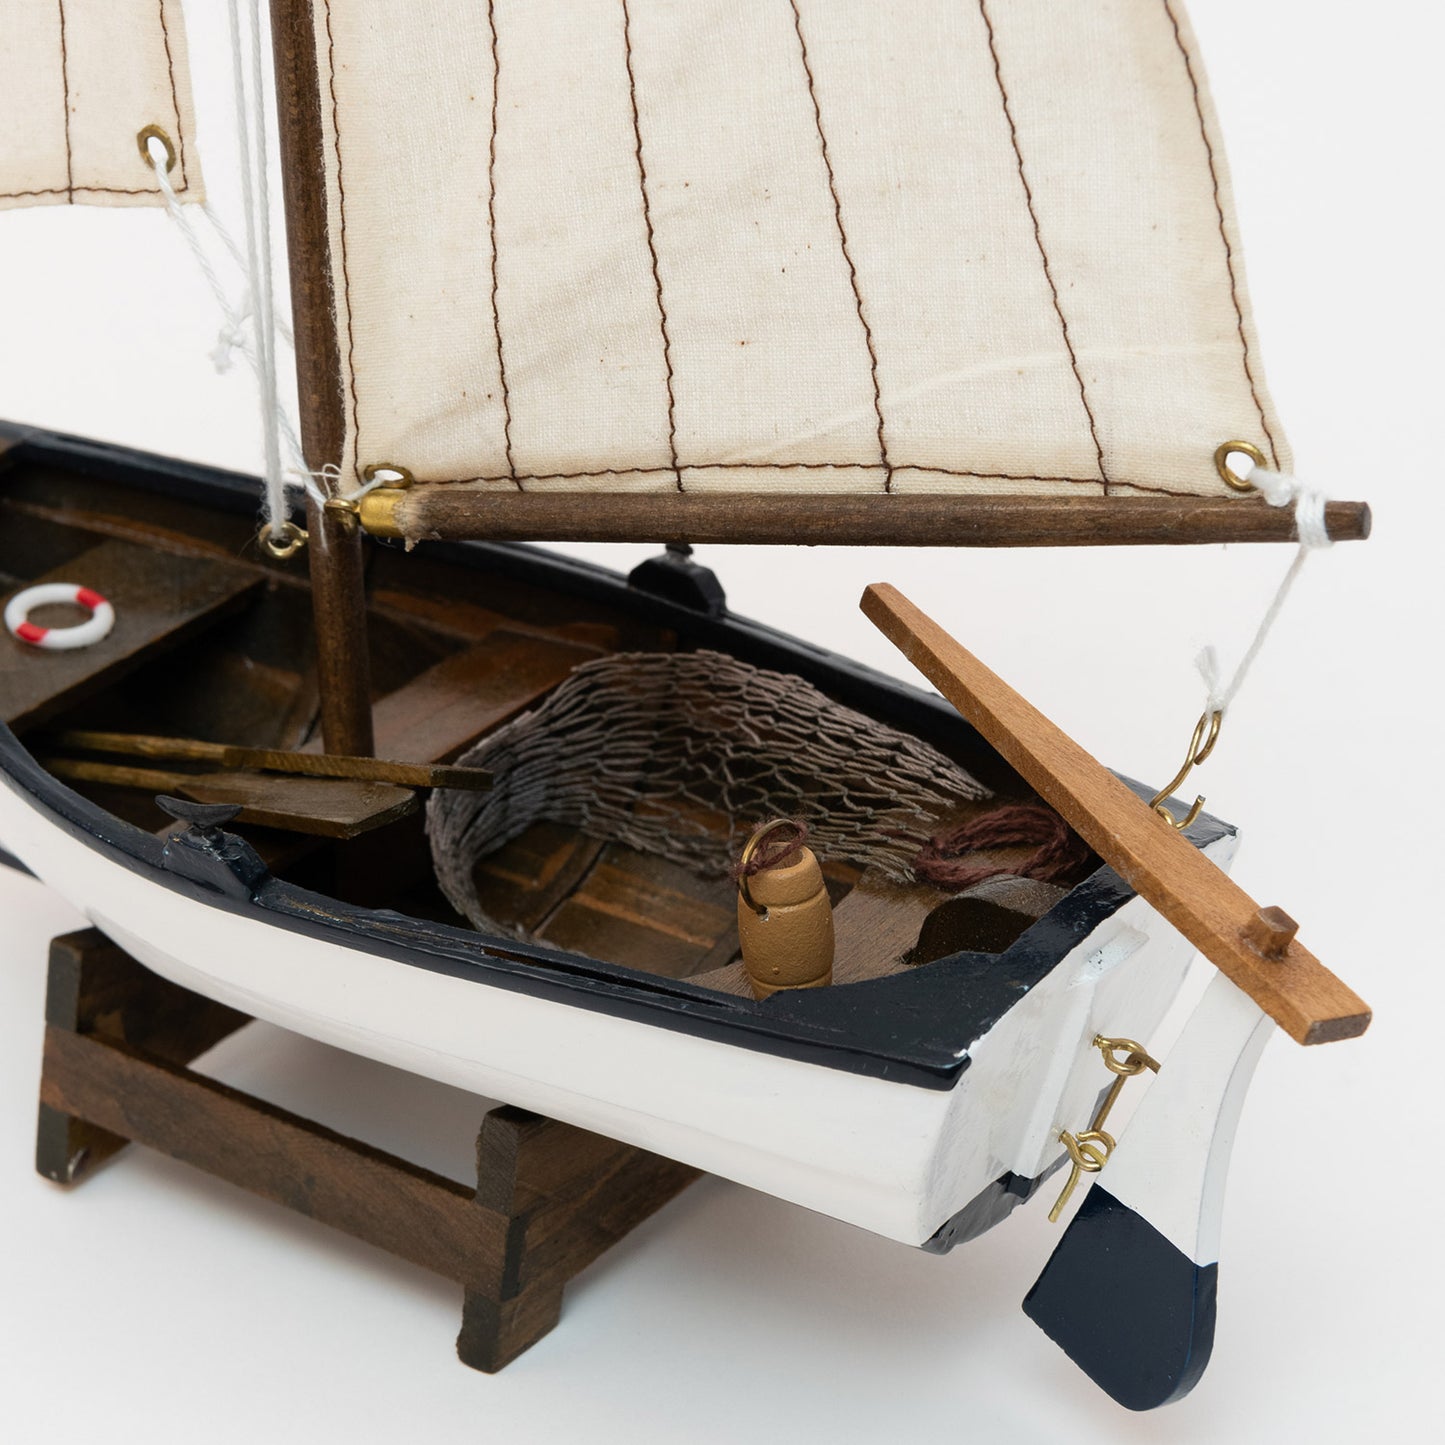 Close-up of the model sailing boat including the rudder and netting on display.